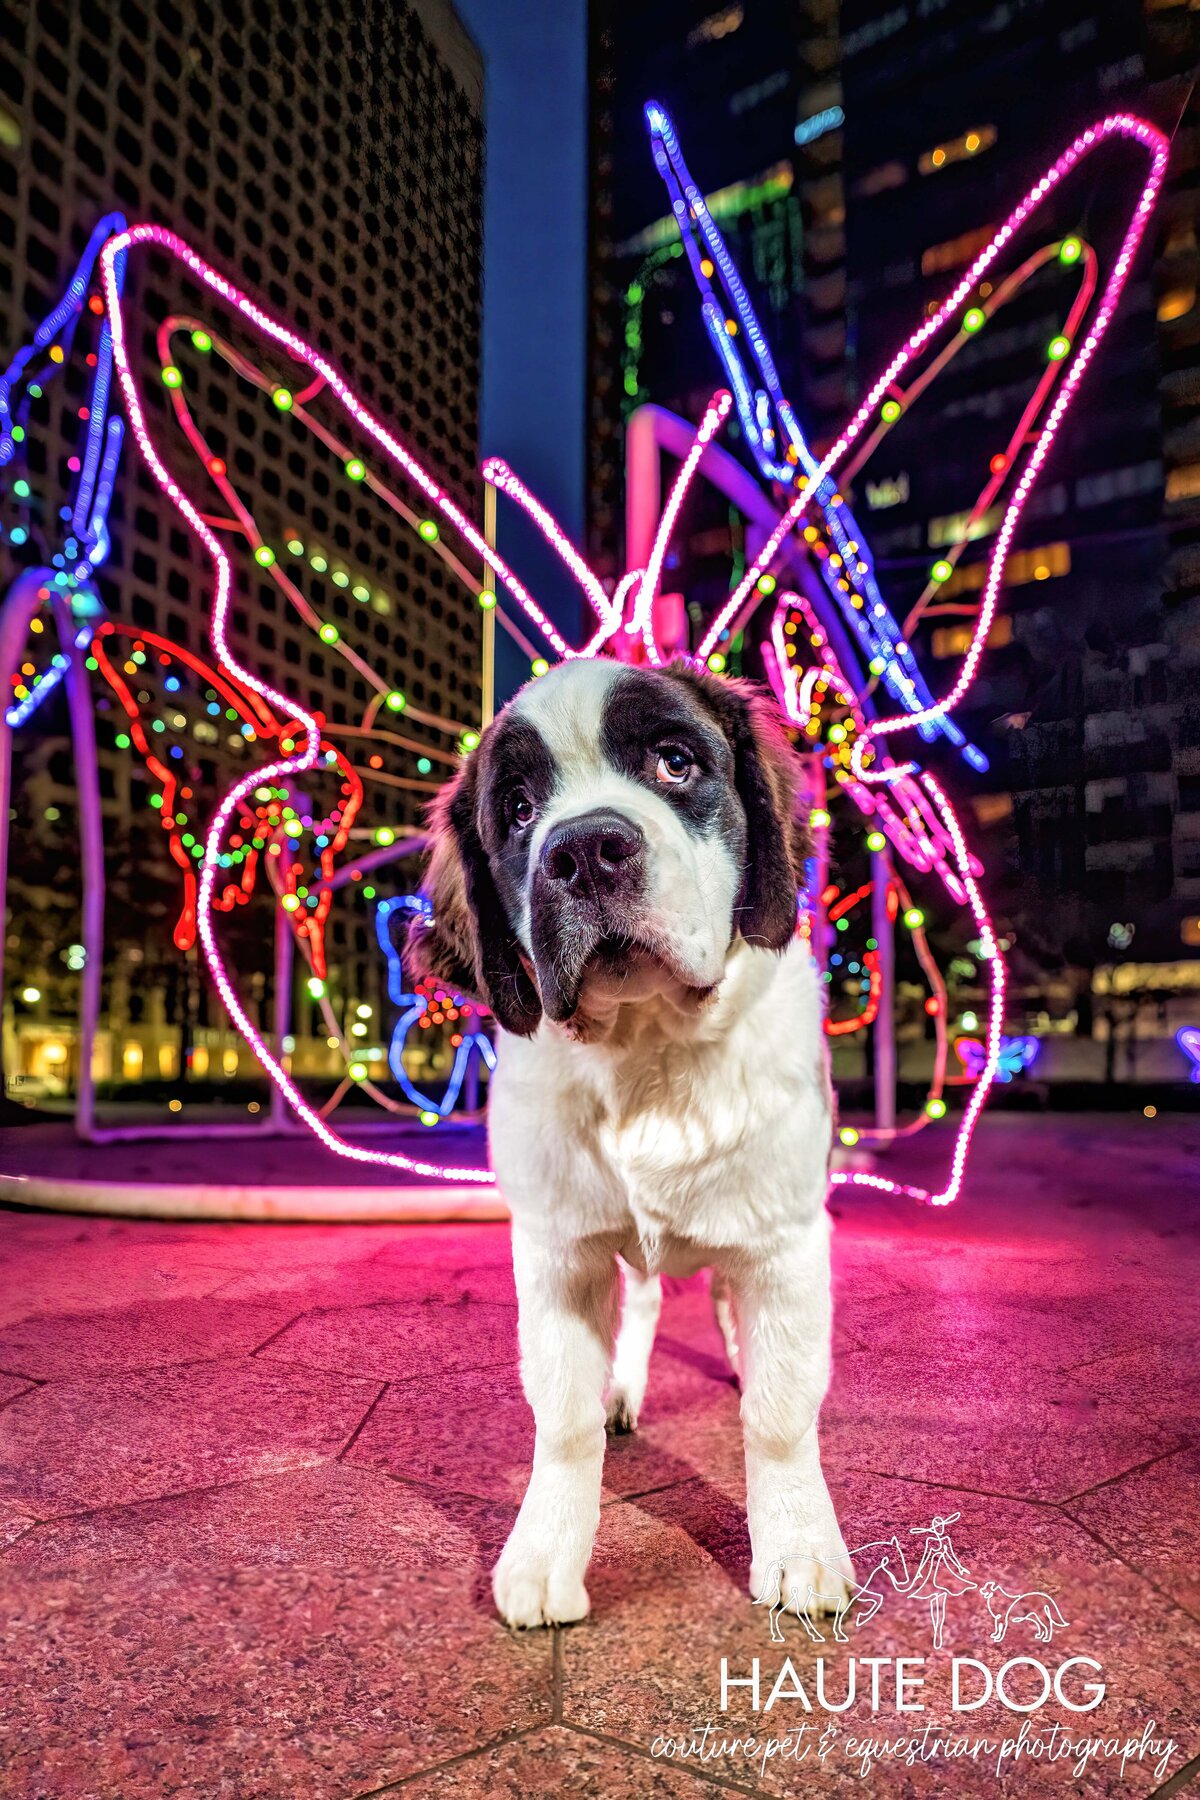 Saint Bernard puppy stands in front of neon butterfly wings at night in downtown Dallas.